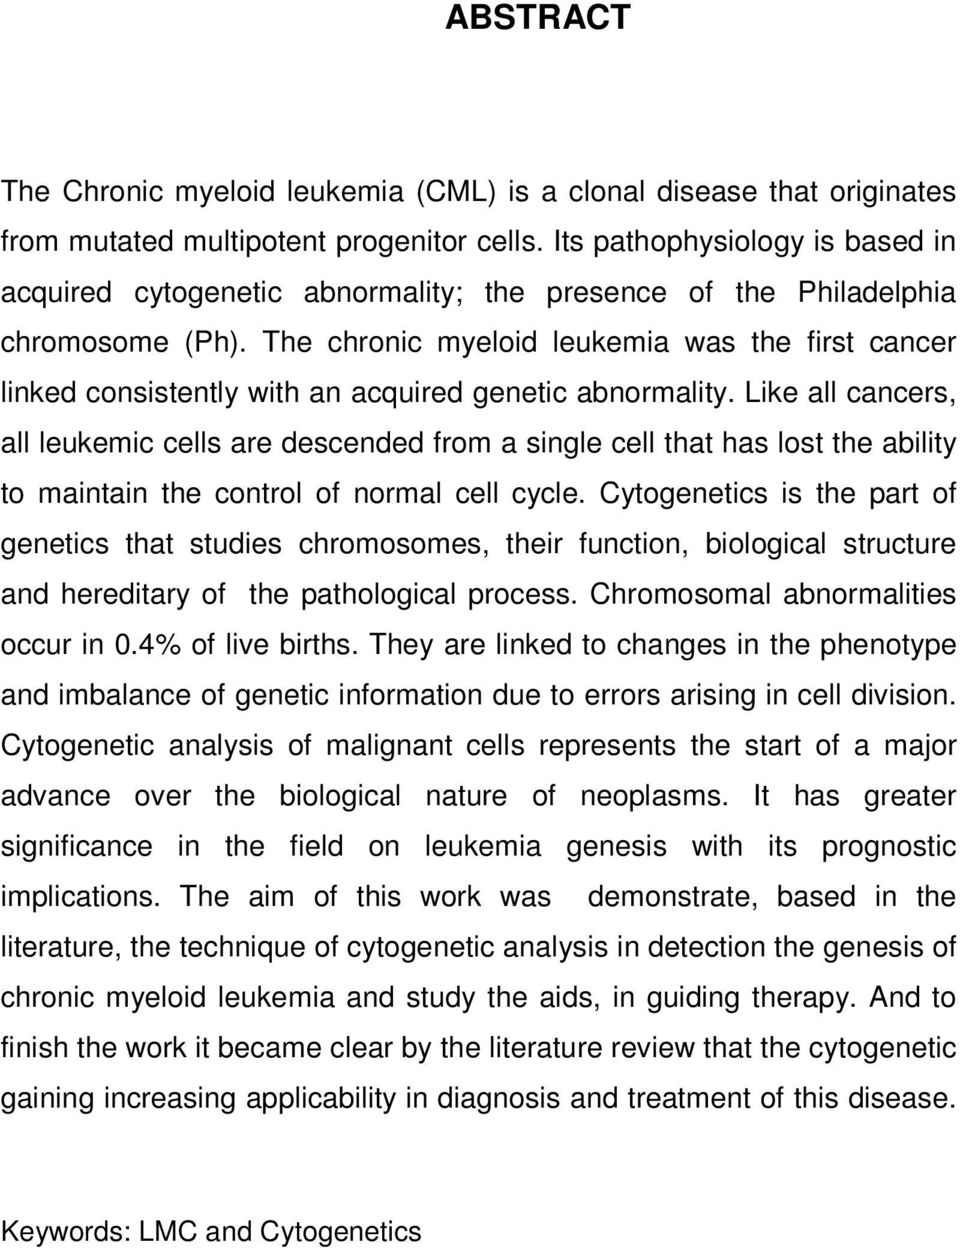 The chronic myeloid leukemia was the first cancer linked consistently with an acquired genetic abnormality.